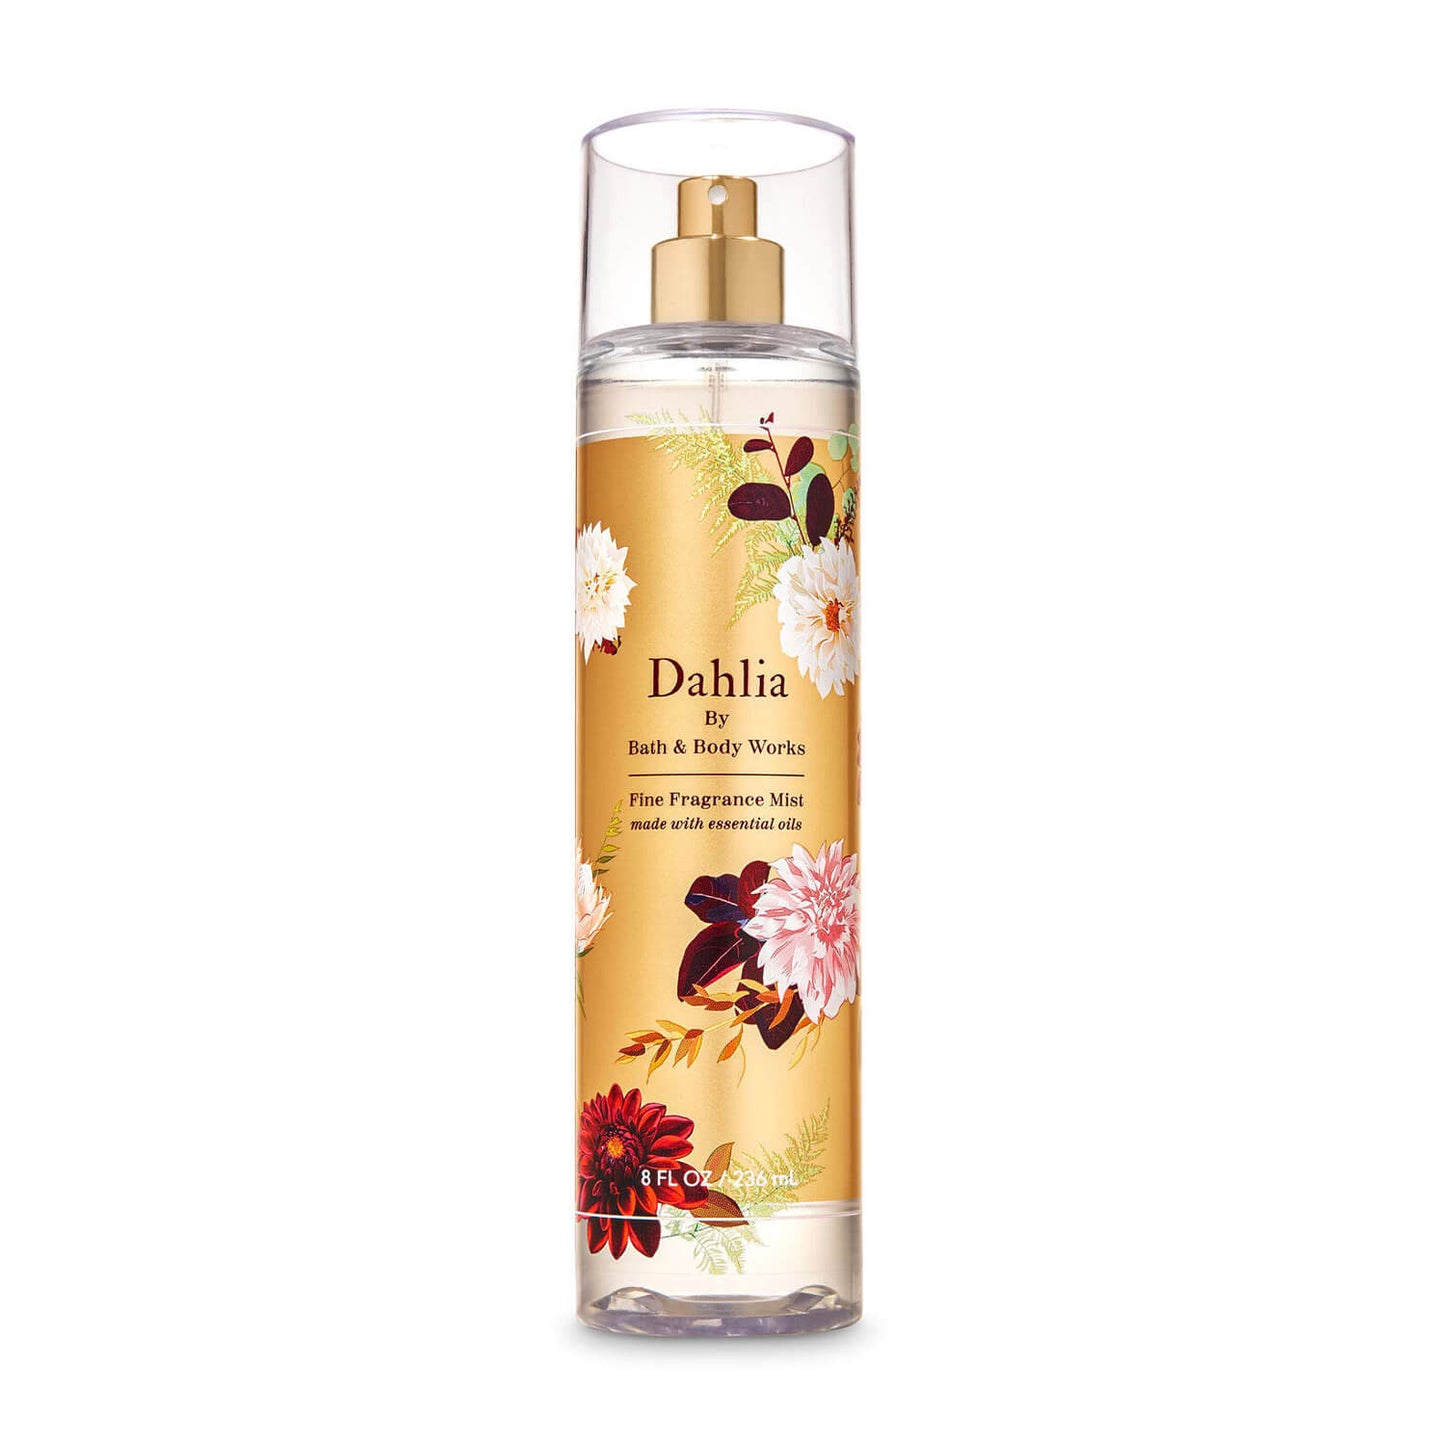 Buy  Bath & Body Works mist in Dahlia fragrance available at heygirl.pk for cash on delivery in Karachi, Lahore, Islamabad, Rawalpindi across Pakistan. 